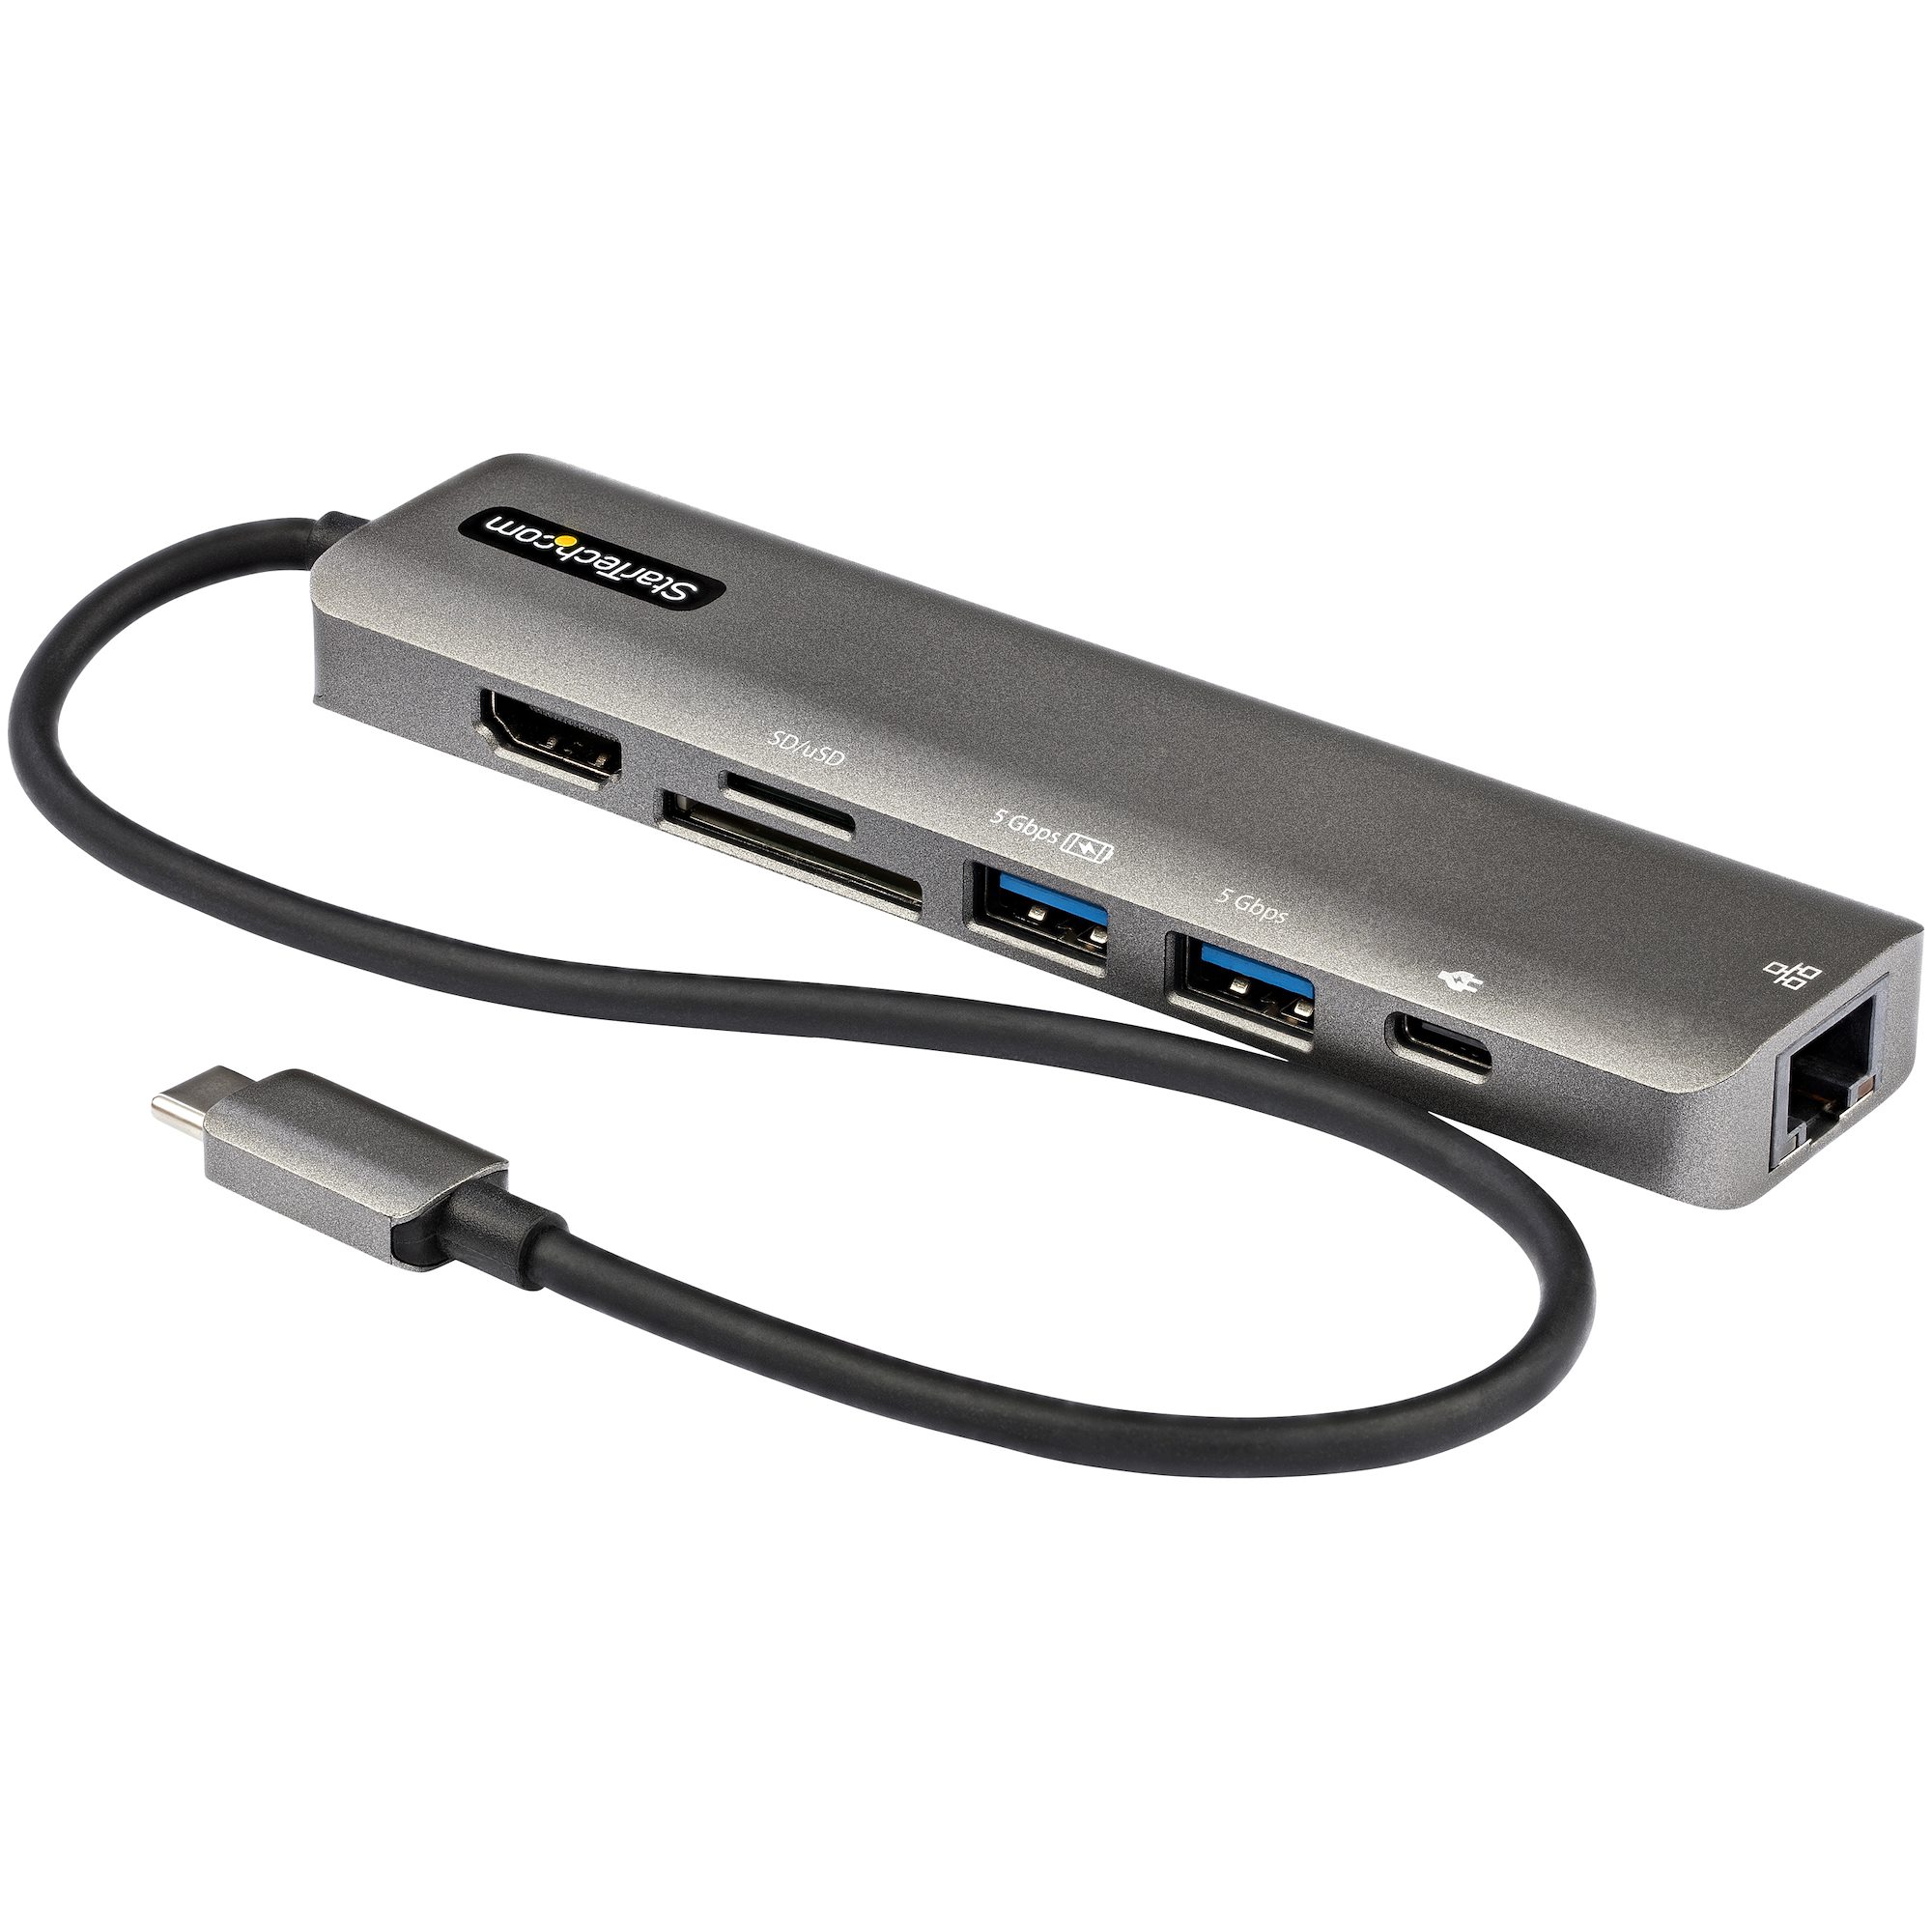 USB-C Card Reader Adapter with SD and Micro SD Port USB 3.0 Port and Pass-Thru Charging with Power Delivery 